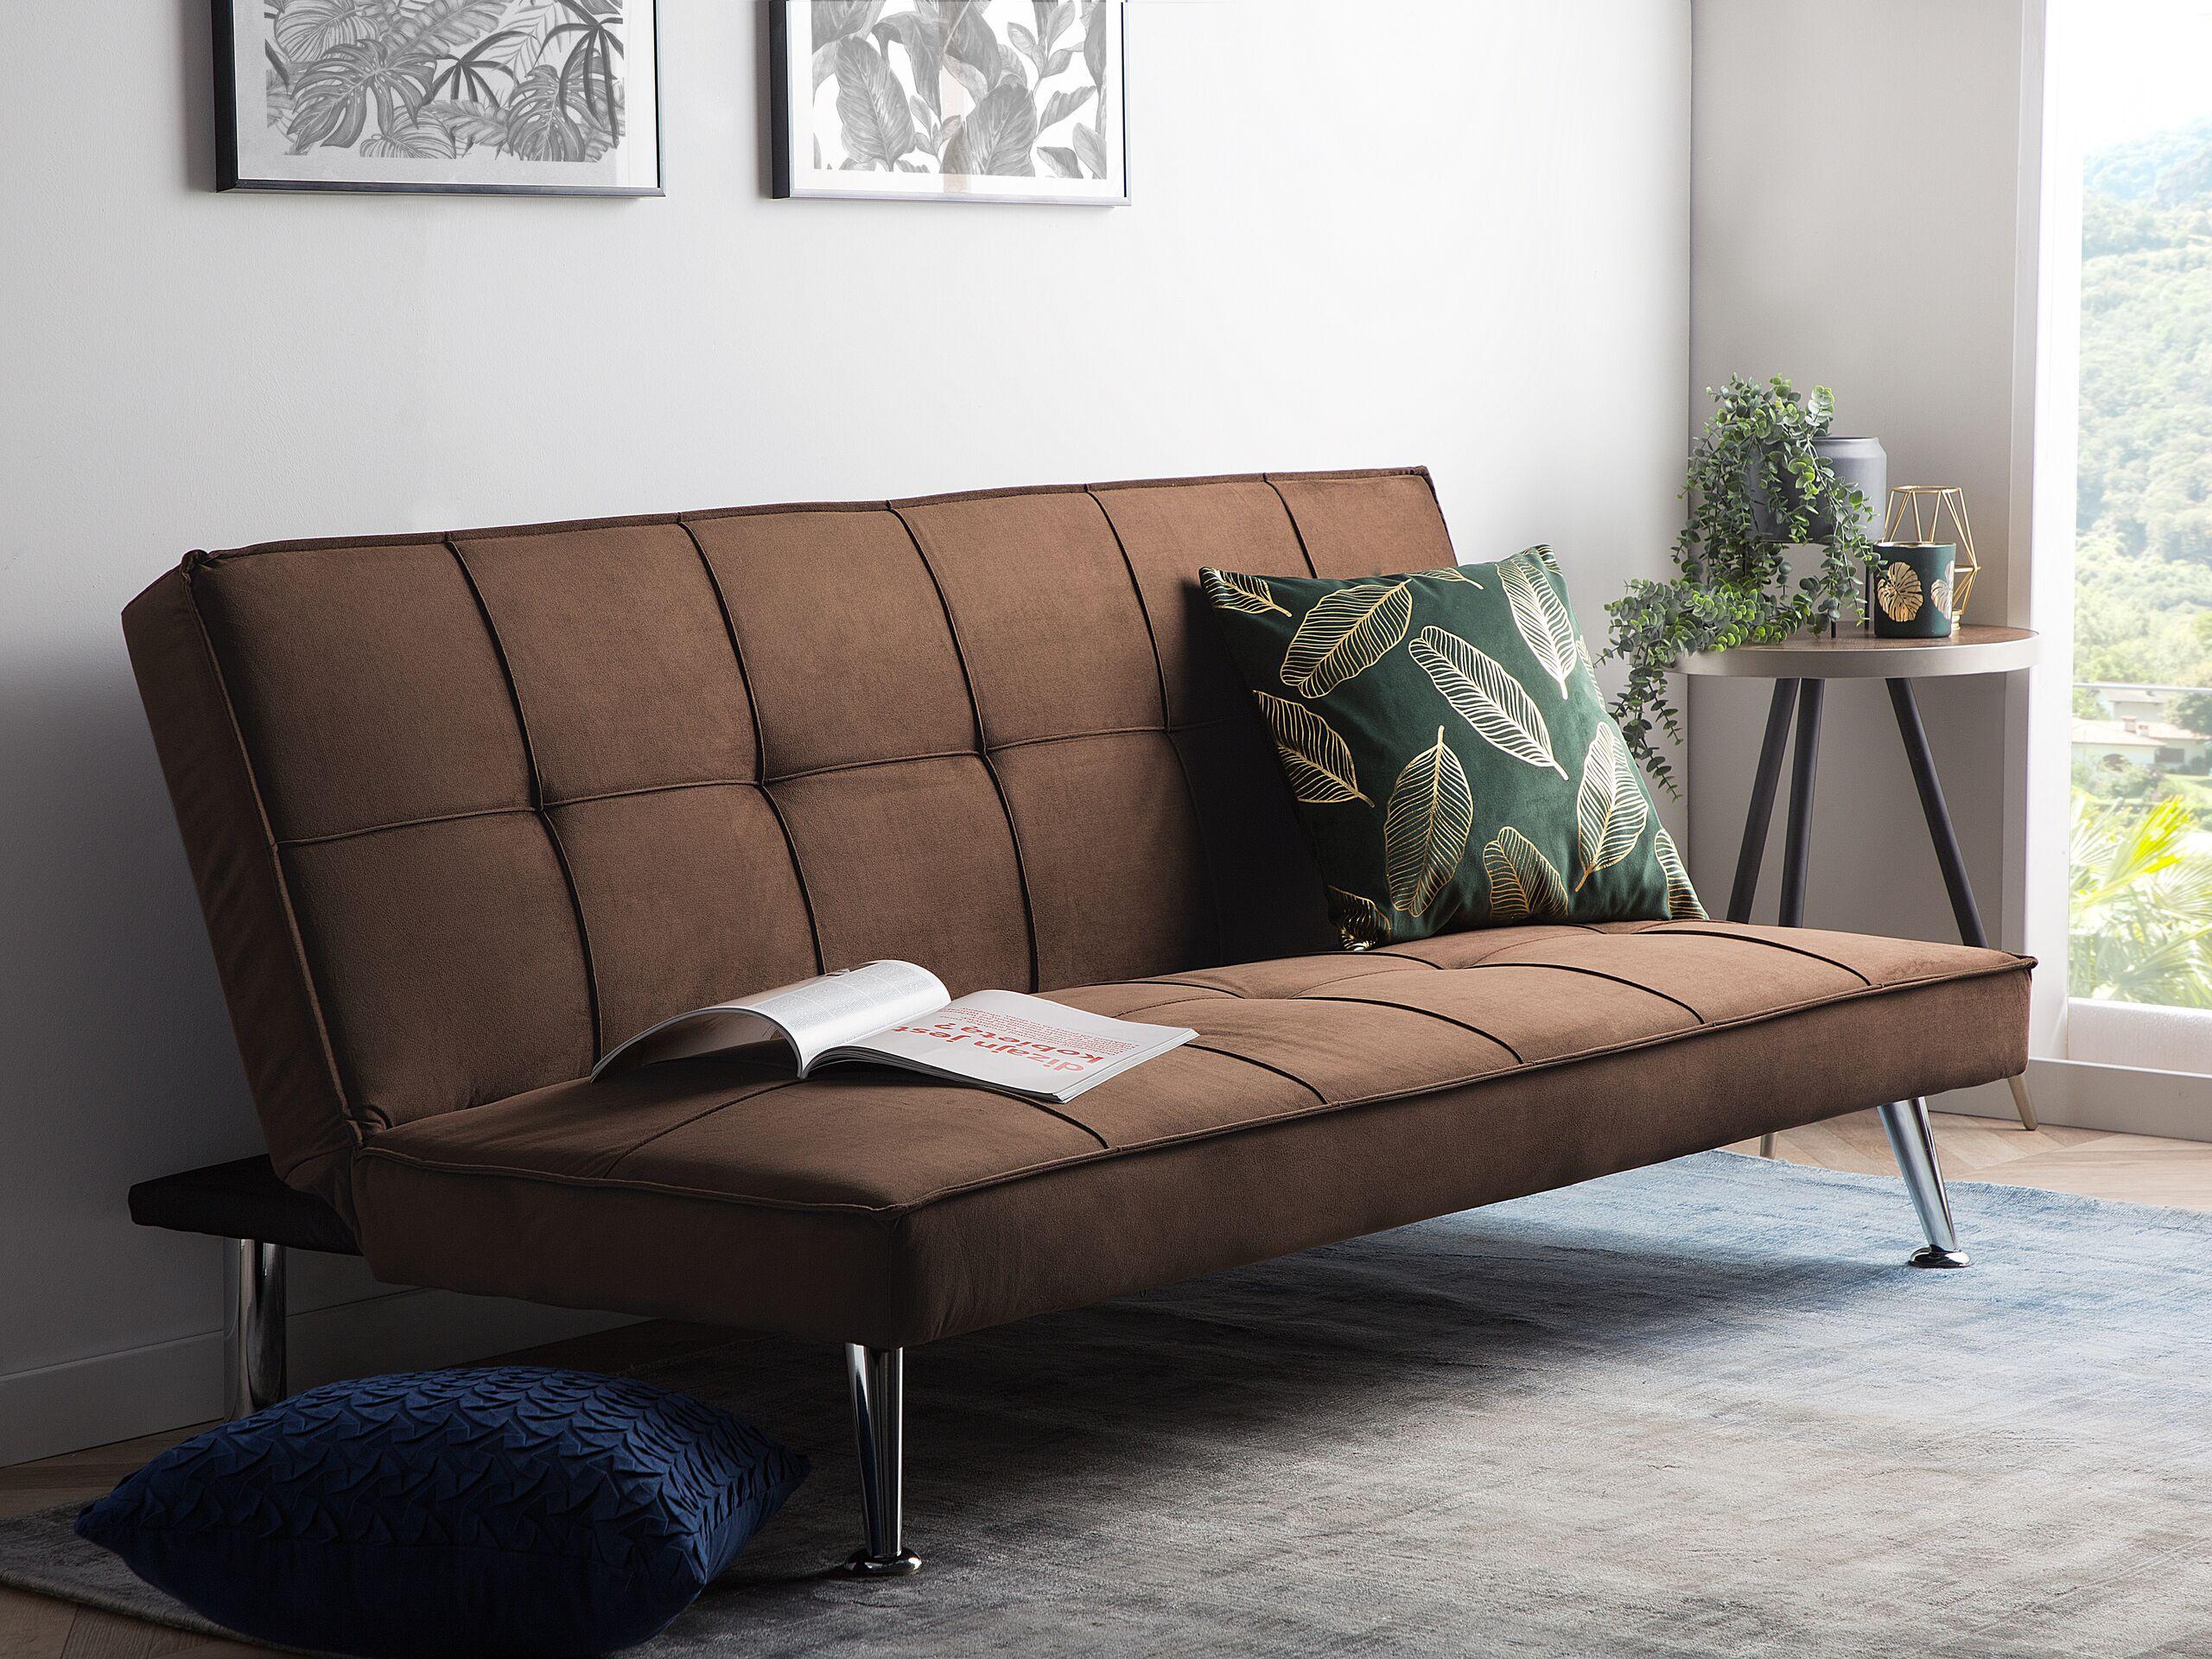 Beliani Schlafcouch aus Polyester Retro HASLE  